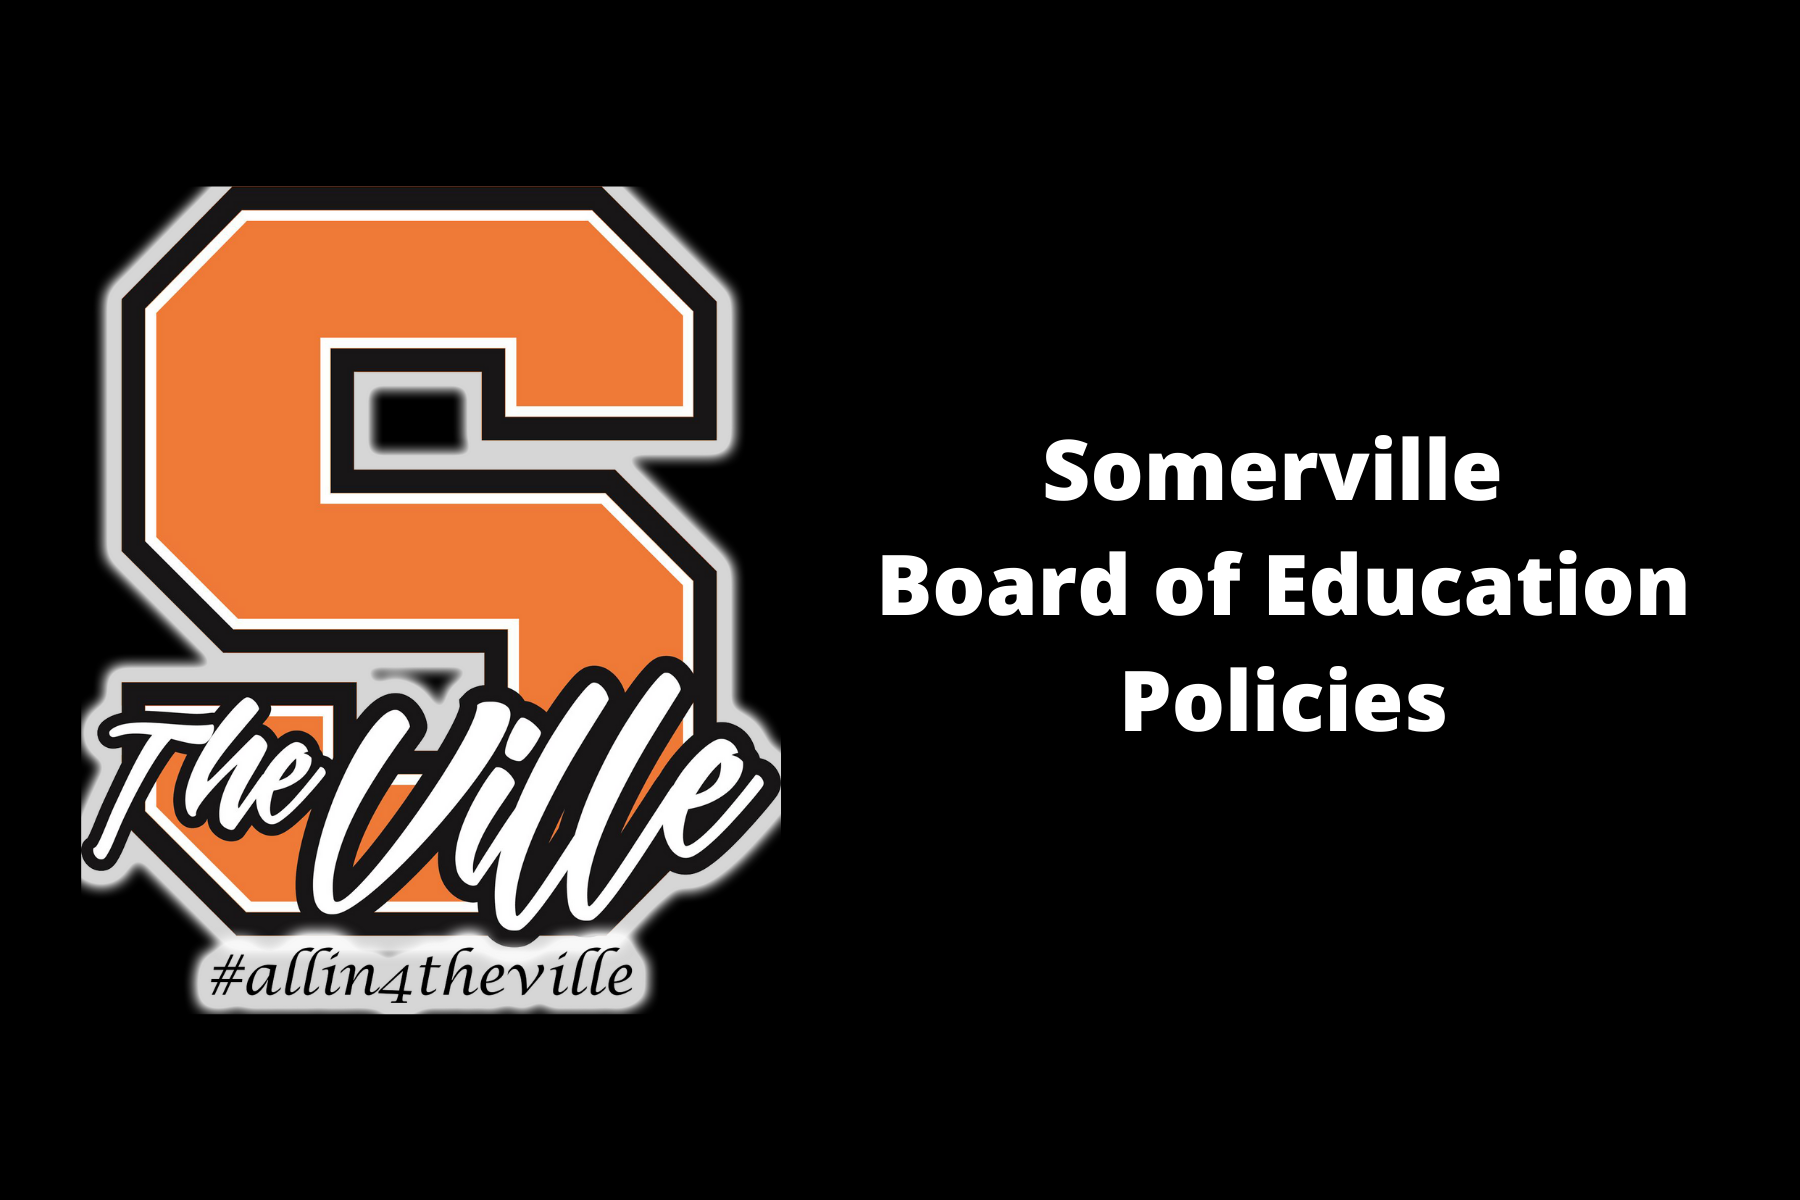 Somerville Board of Education Policies with logo